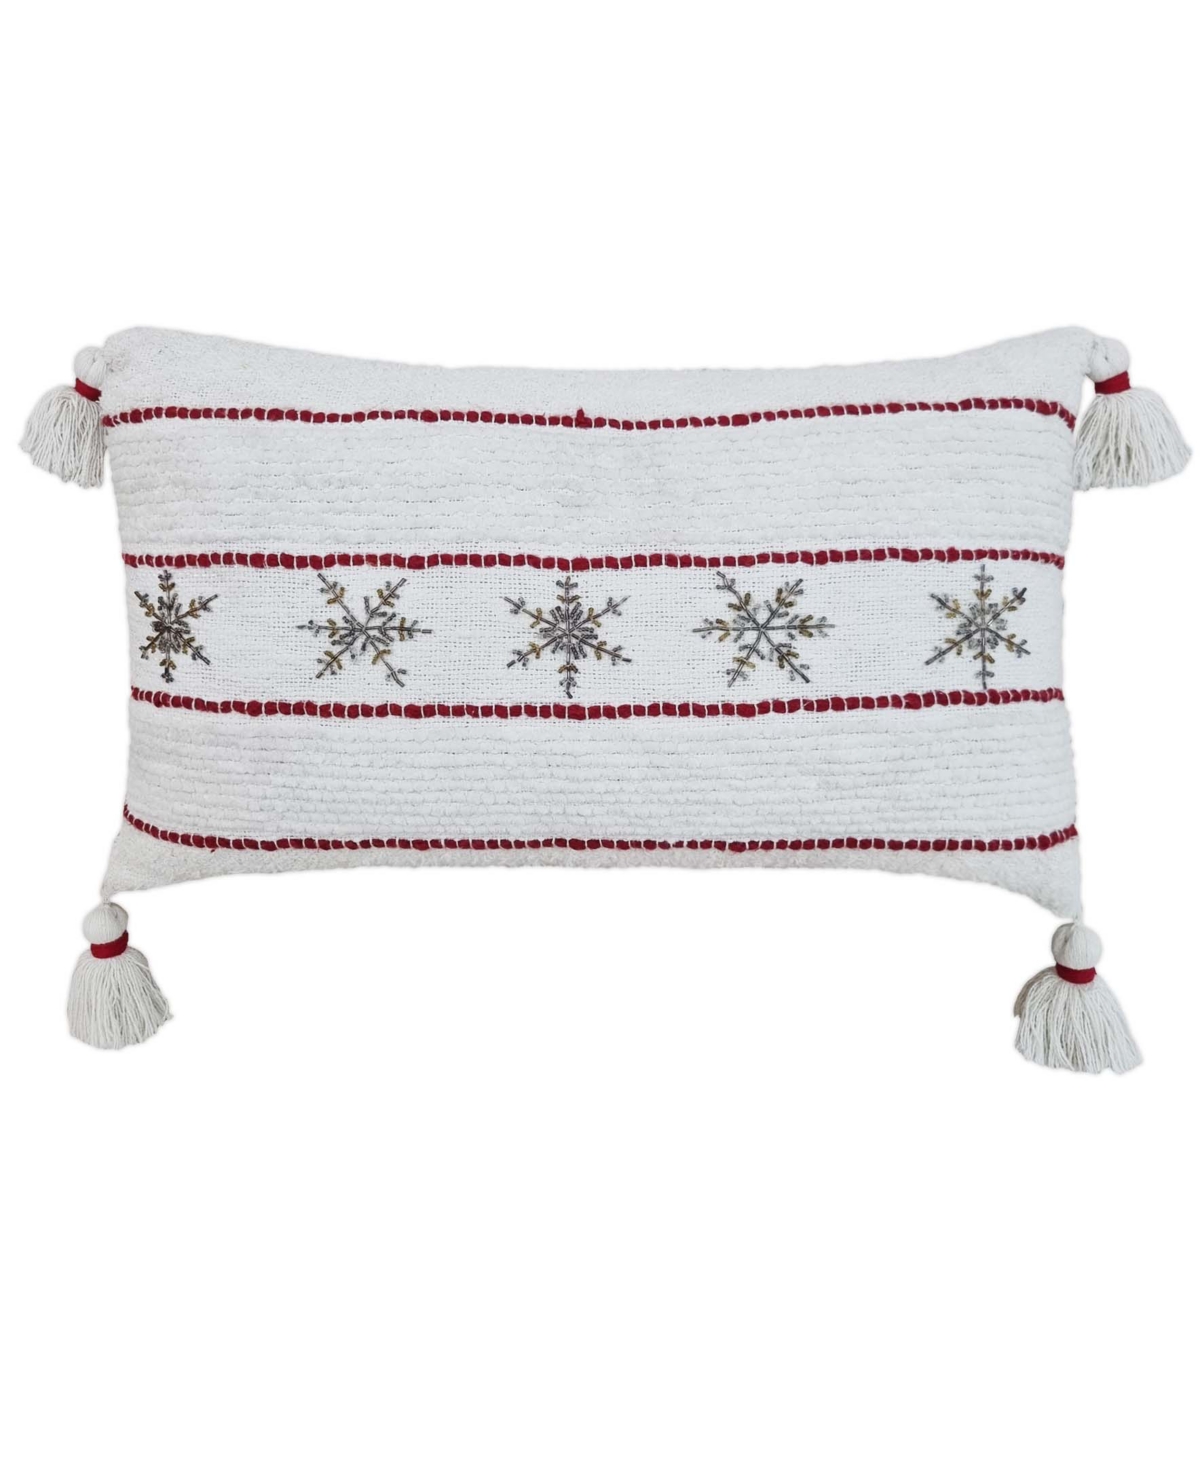 Vibhsa Christmas Pillow For Holidays, 24" X 14" In Ivory/red